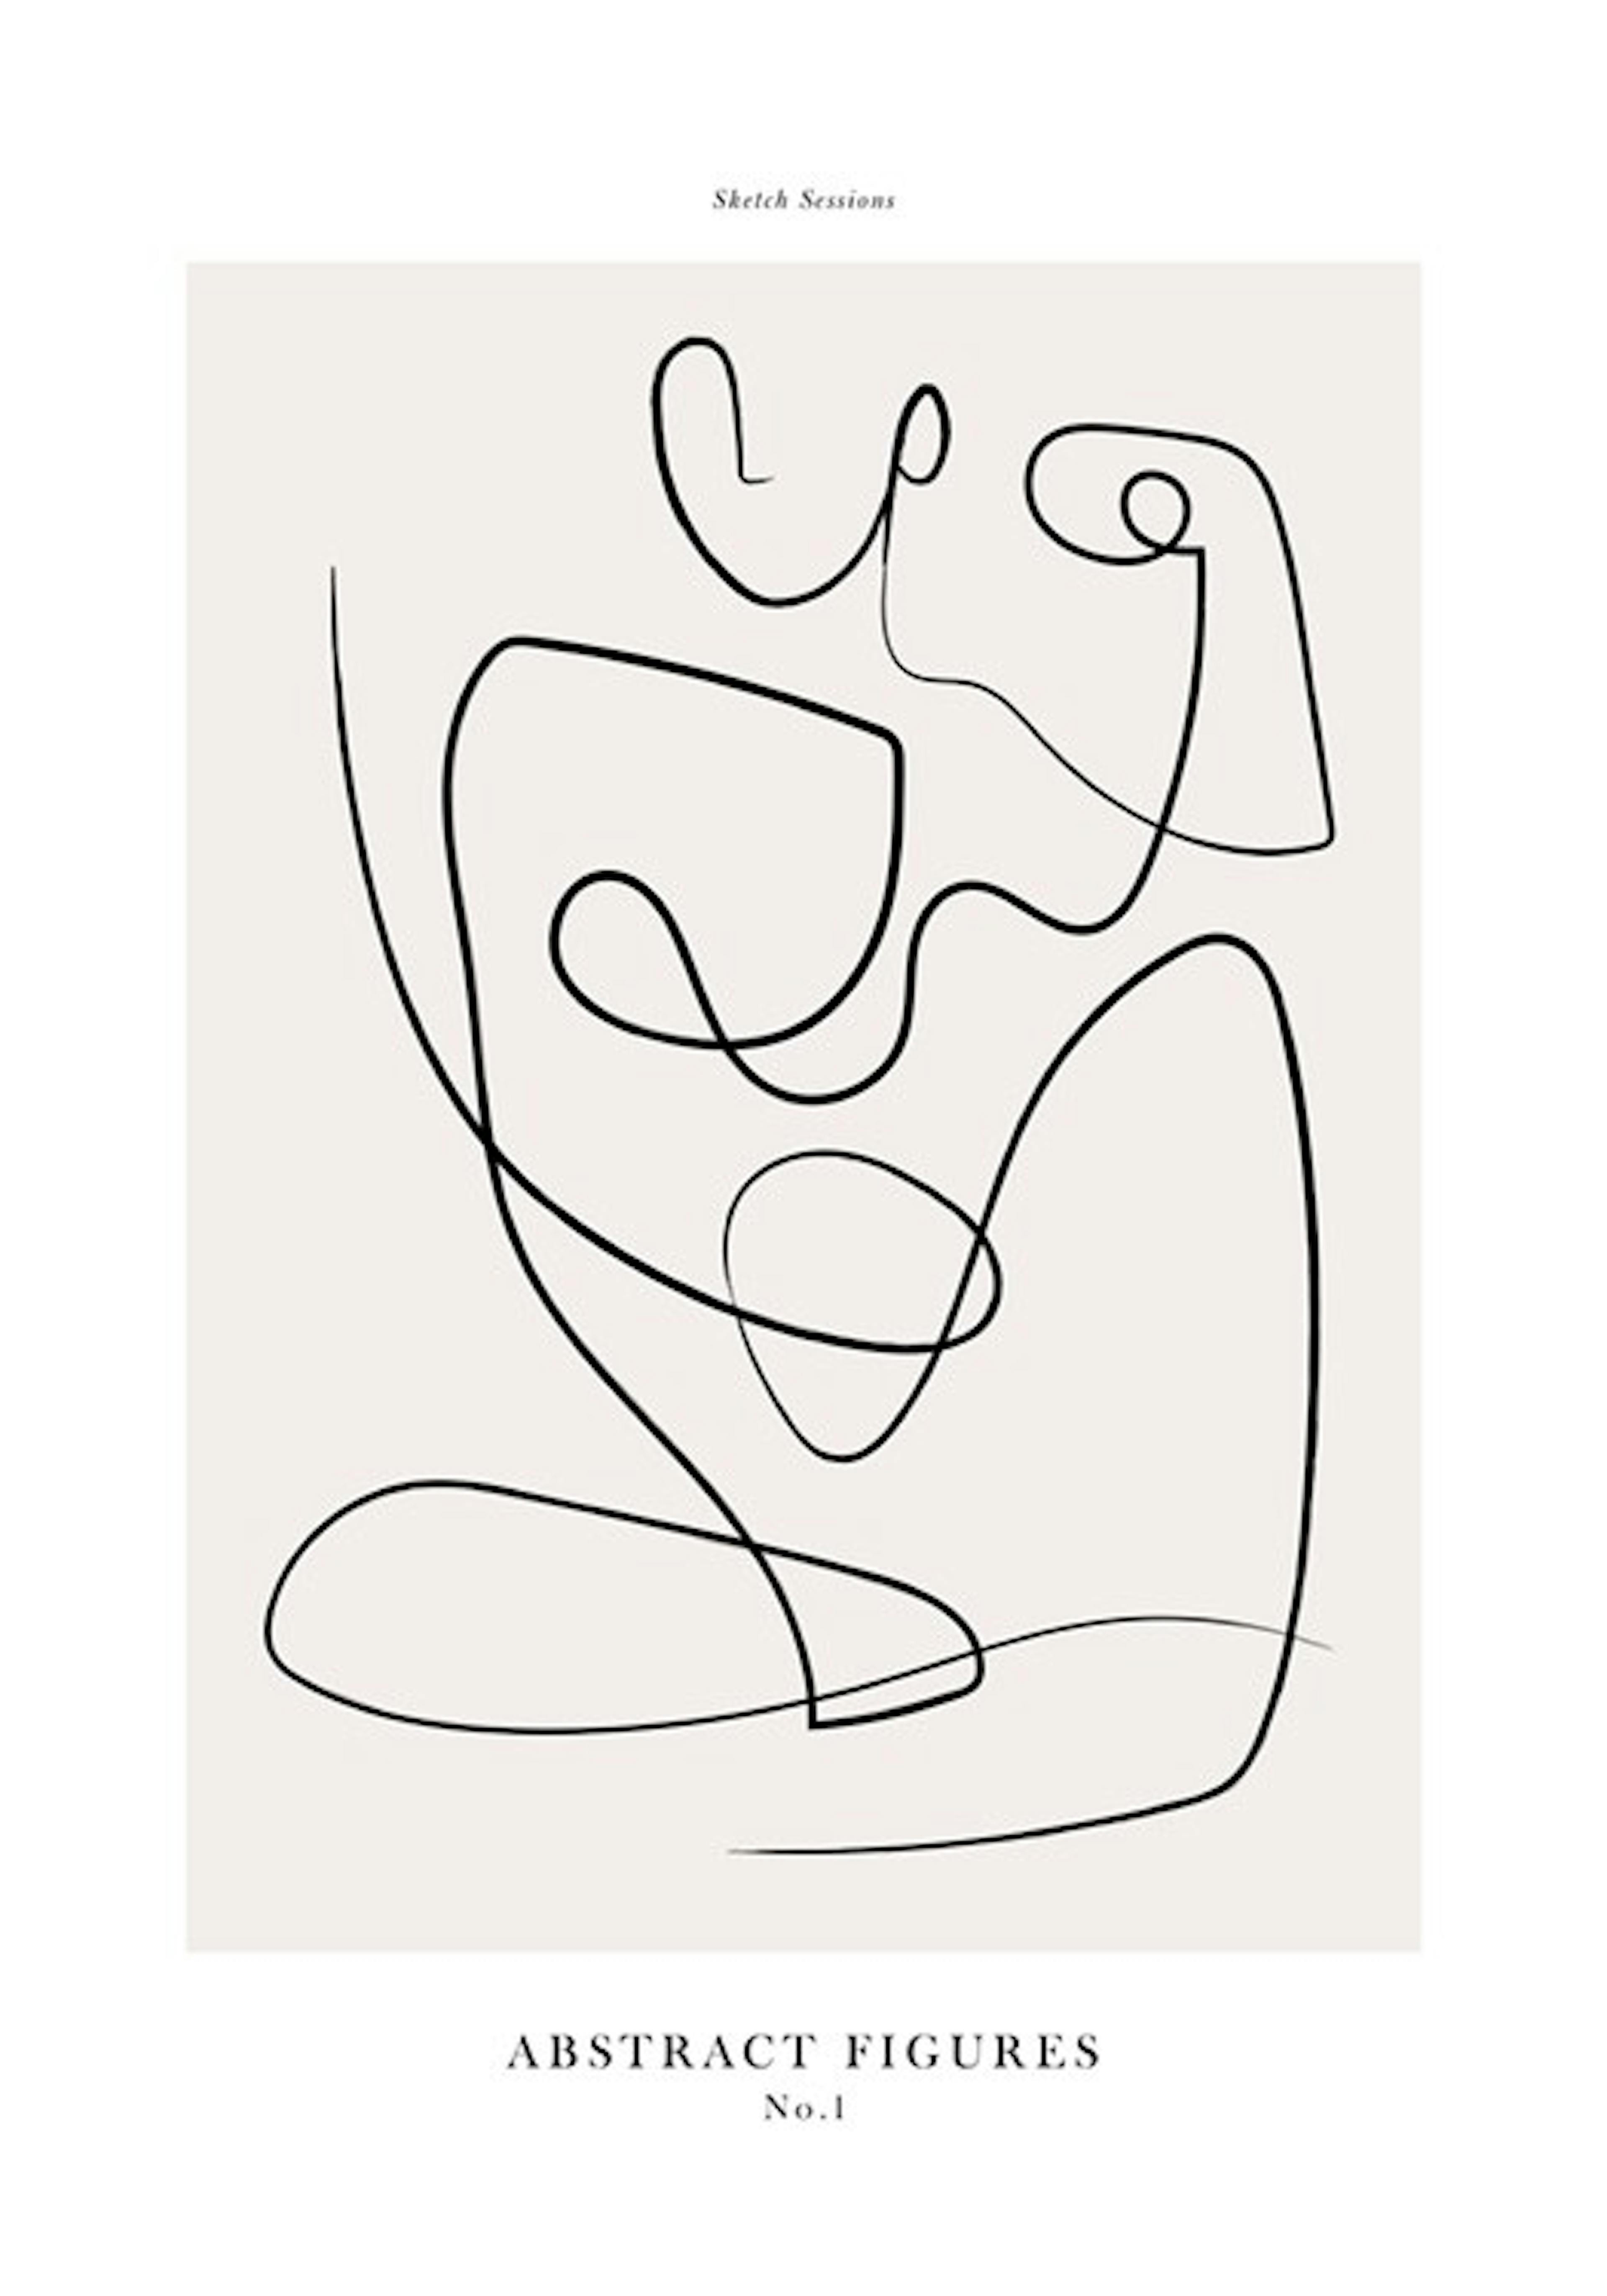 Abstract Figures No1 Juliste 0